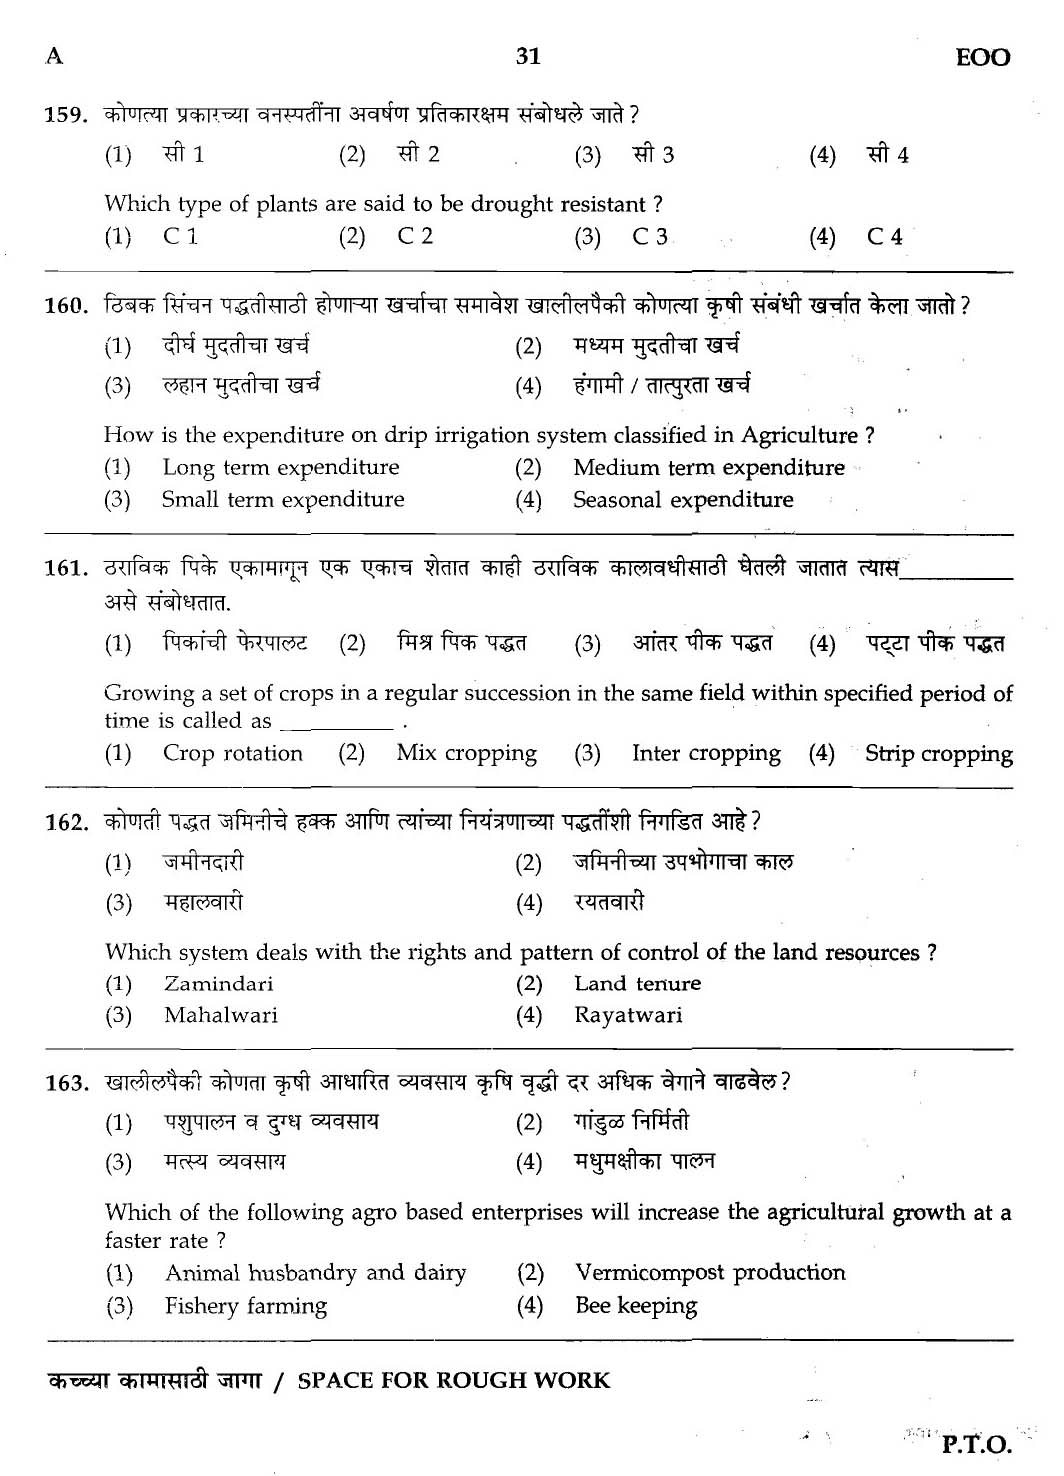 MPSC Agricultural Services Preliminary Exam 2012 Question Paper 30